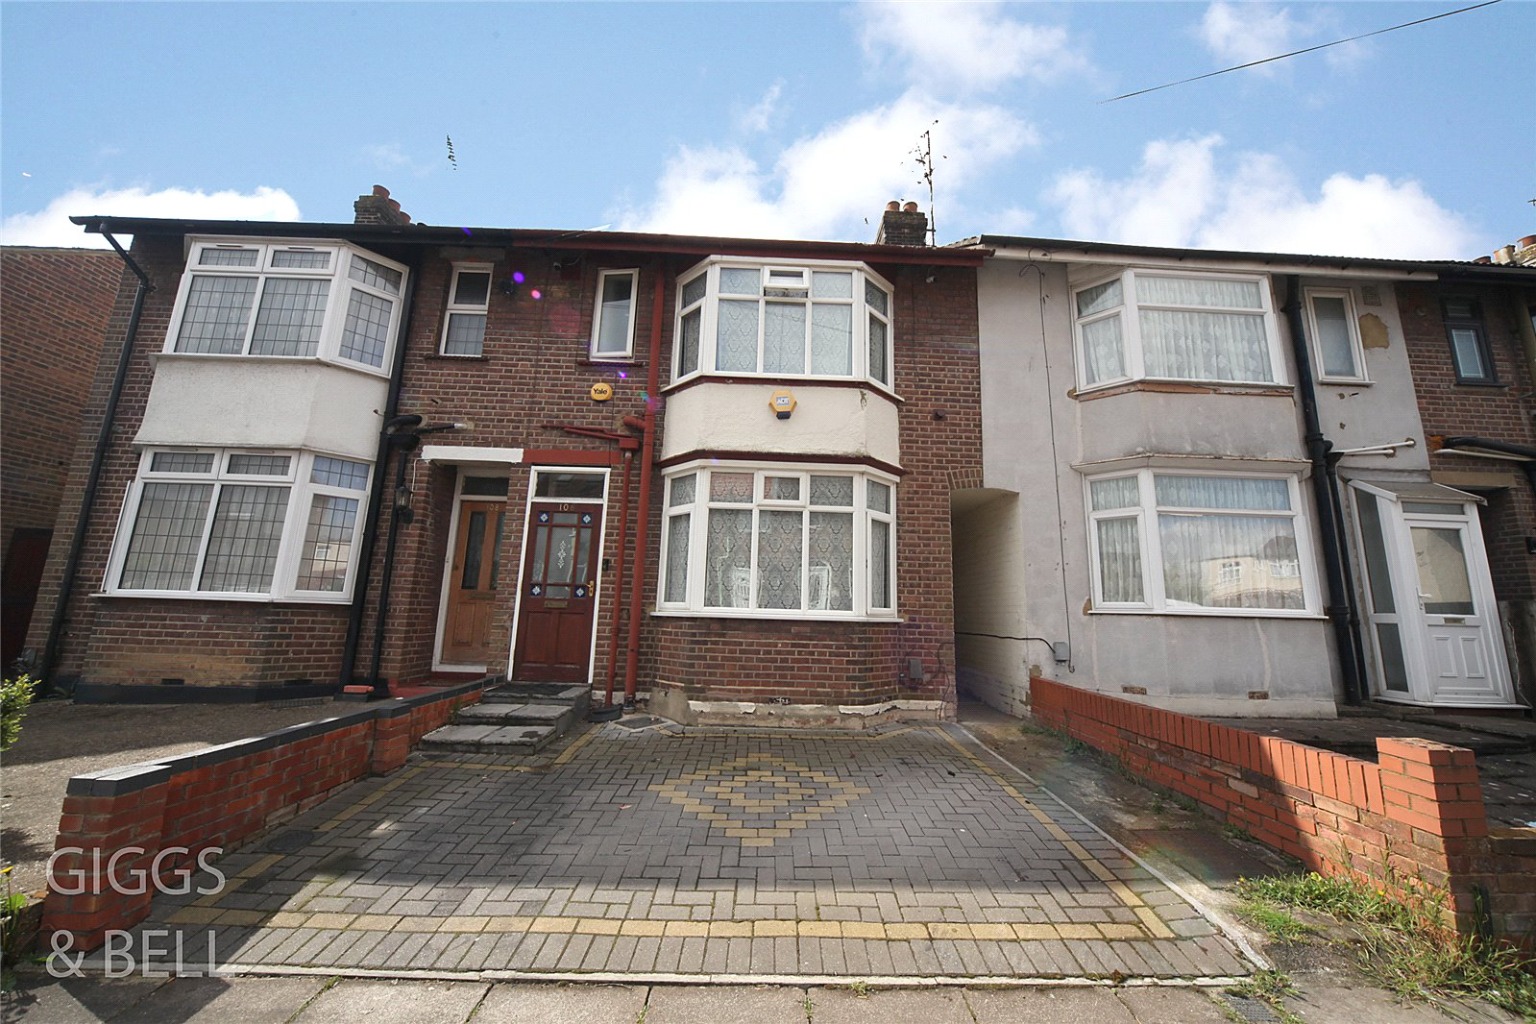 2 bed terraced house for sale in St Augustine Avenue, Luton, LU3 